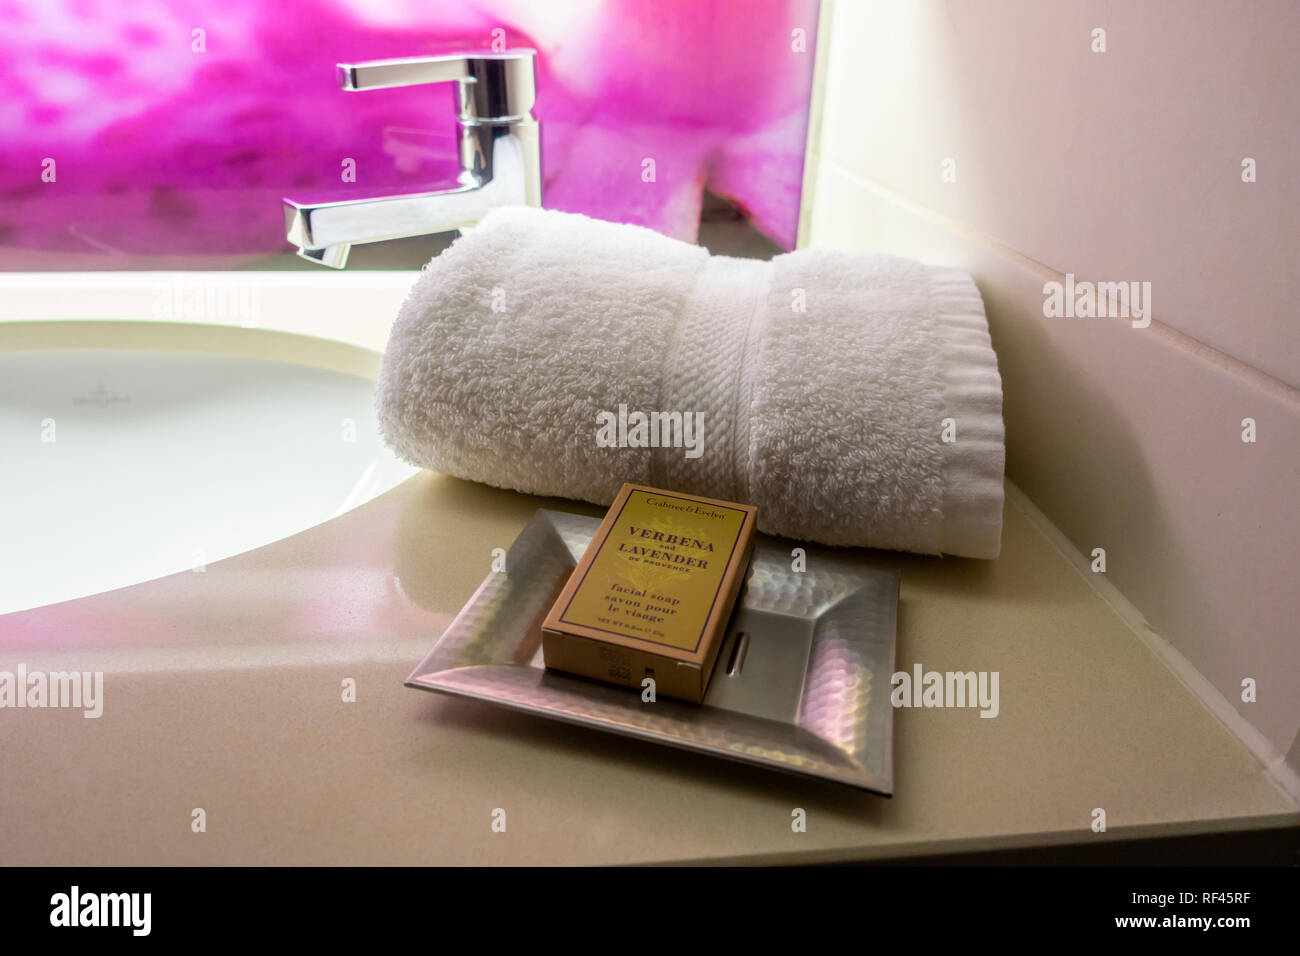 A white towel and packet of soap neatly arranged in a hotel bathroom. Stock Photo